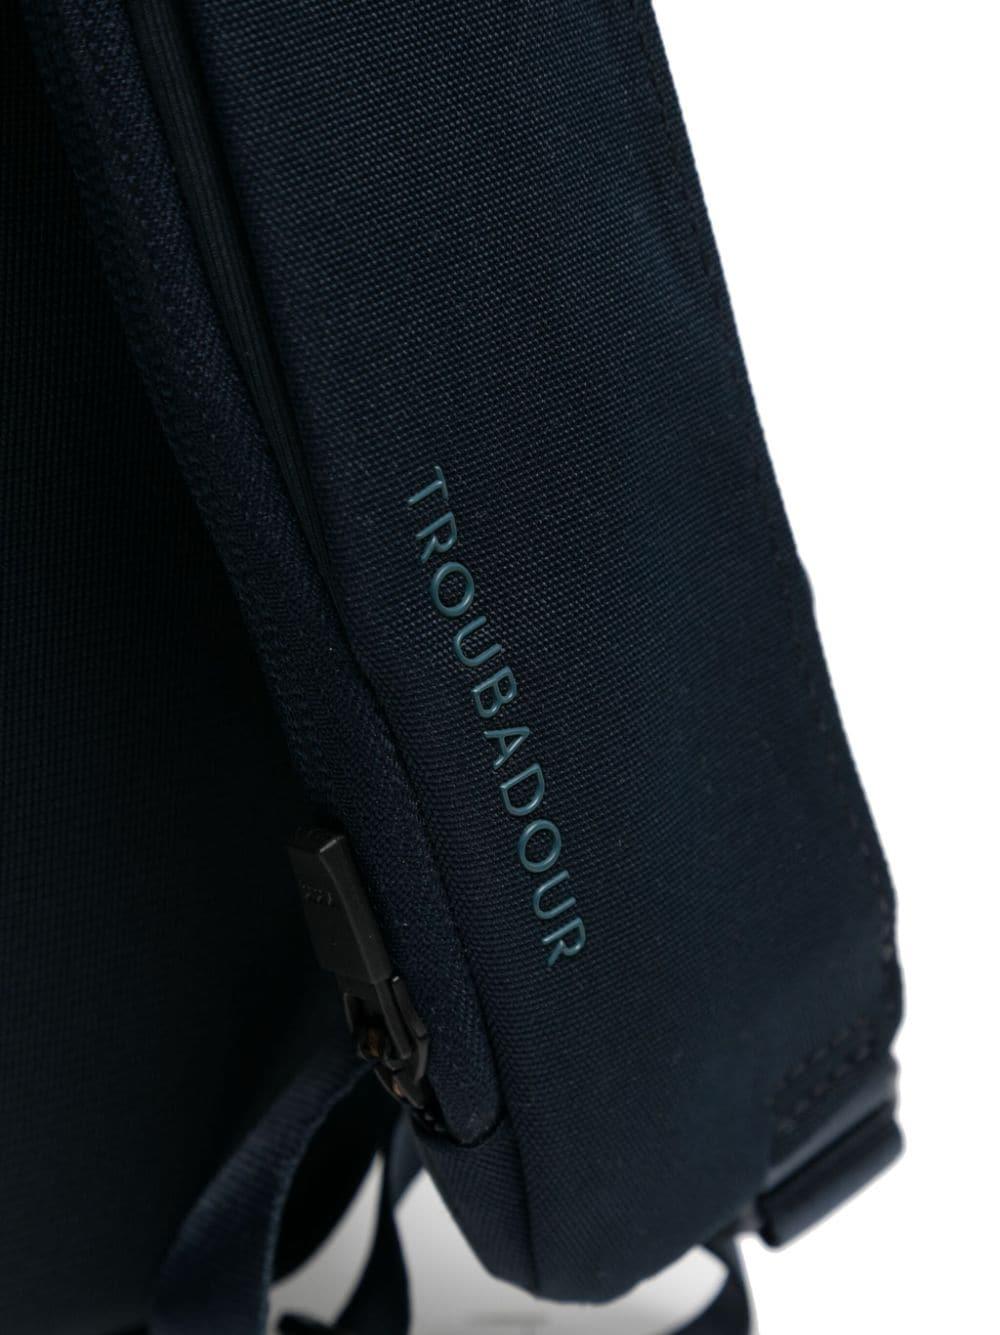 Compact Apex Backpack, Lightweight Waterproof Recycled Fabric, Troubadour  Goods